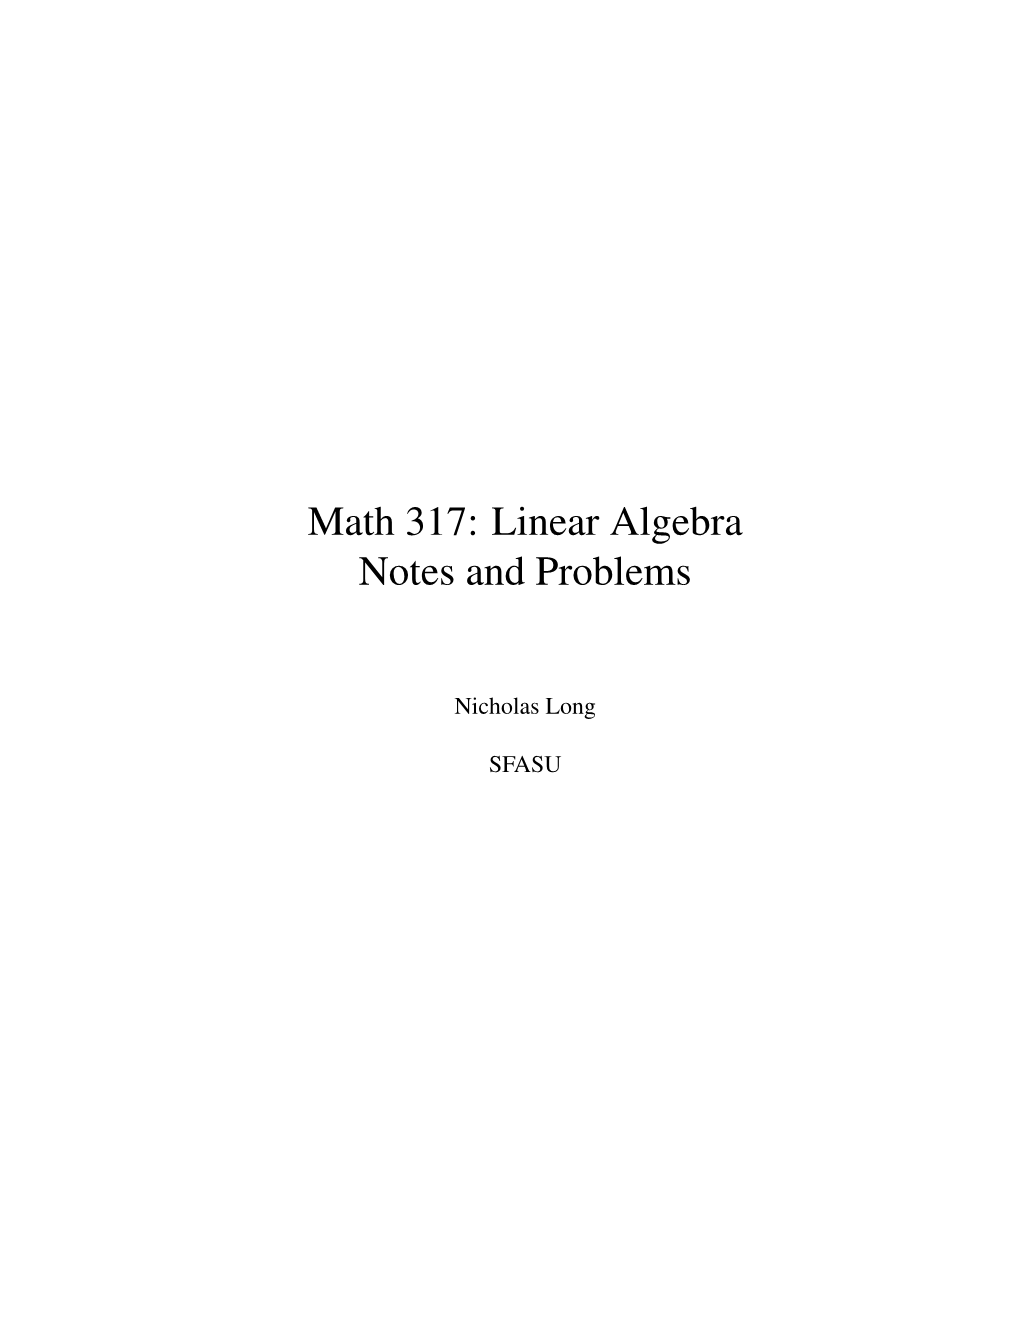 Math 317: Linear Algebra Notes and Problems